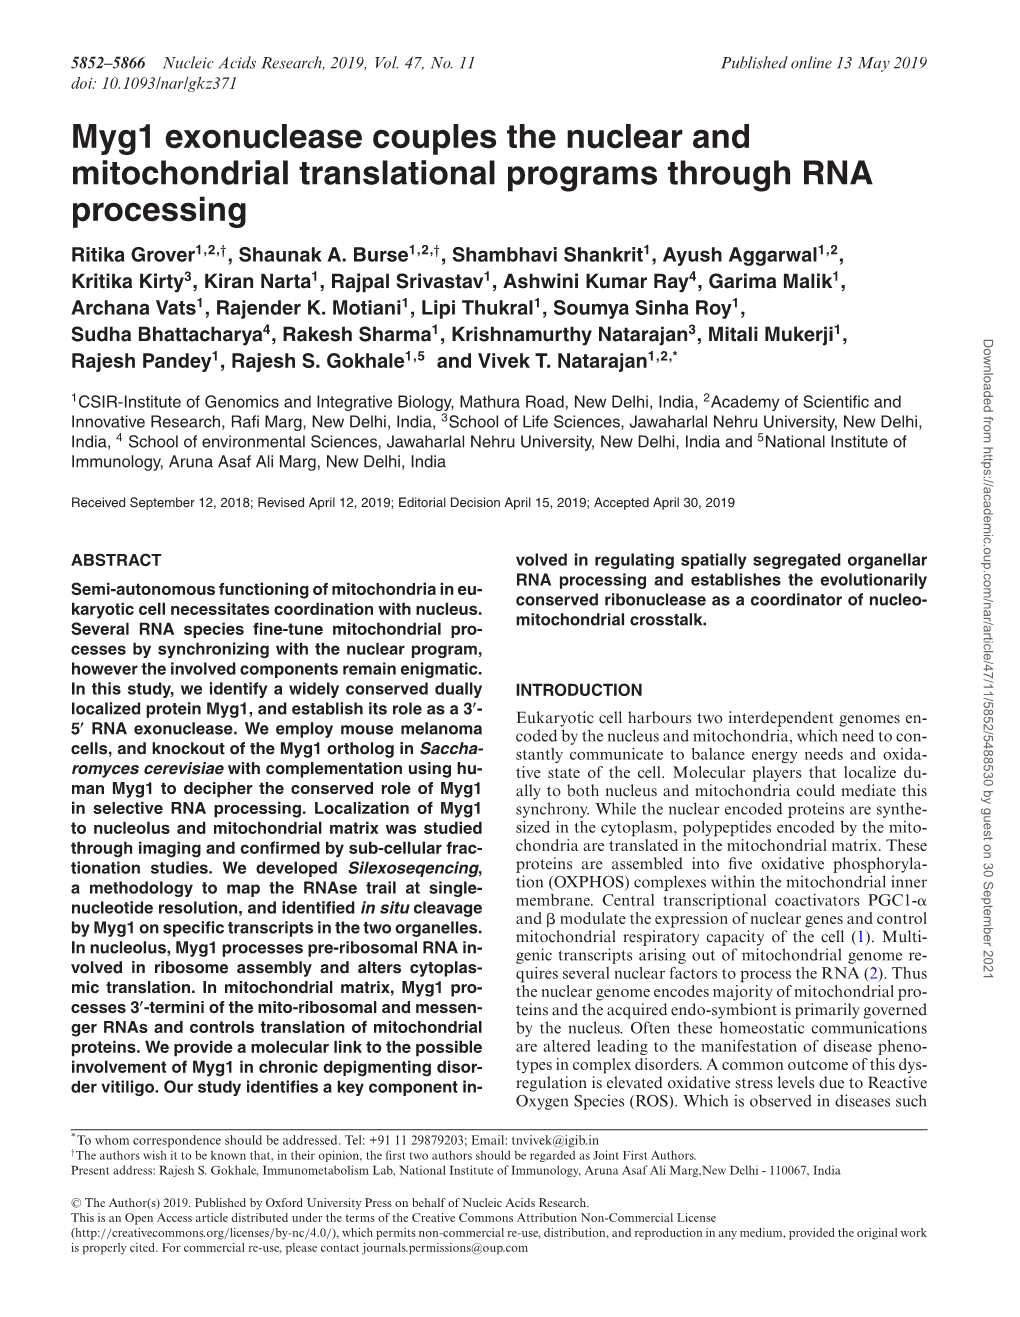 Myg1 Exonuclease Couples the Nuclear and Mitochondrial Translational Programs Through RNA Processing Ritika Grover1,2,†, Shaunak A